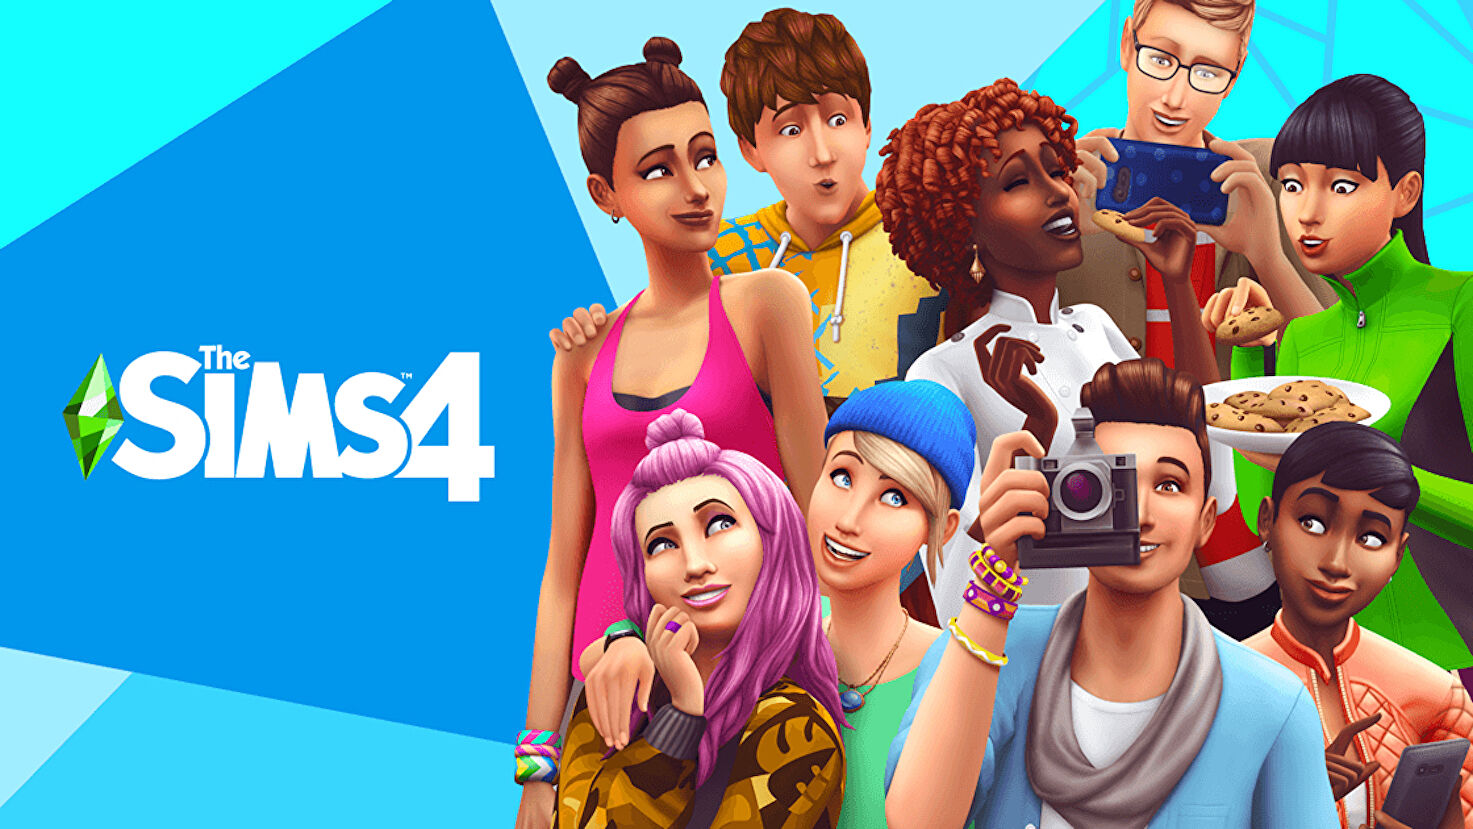 EA promise to “do better” after their first Sims Summit “did not fairly represent” players